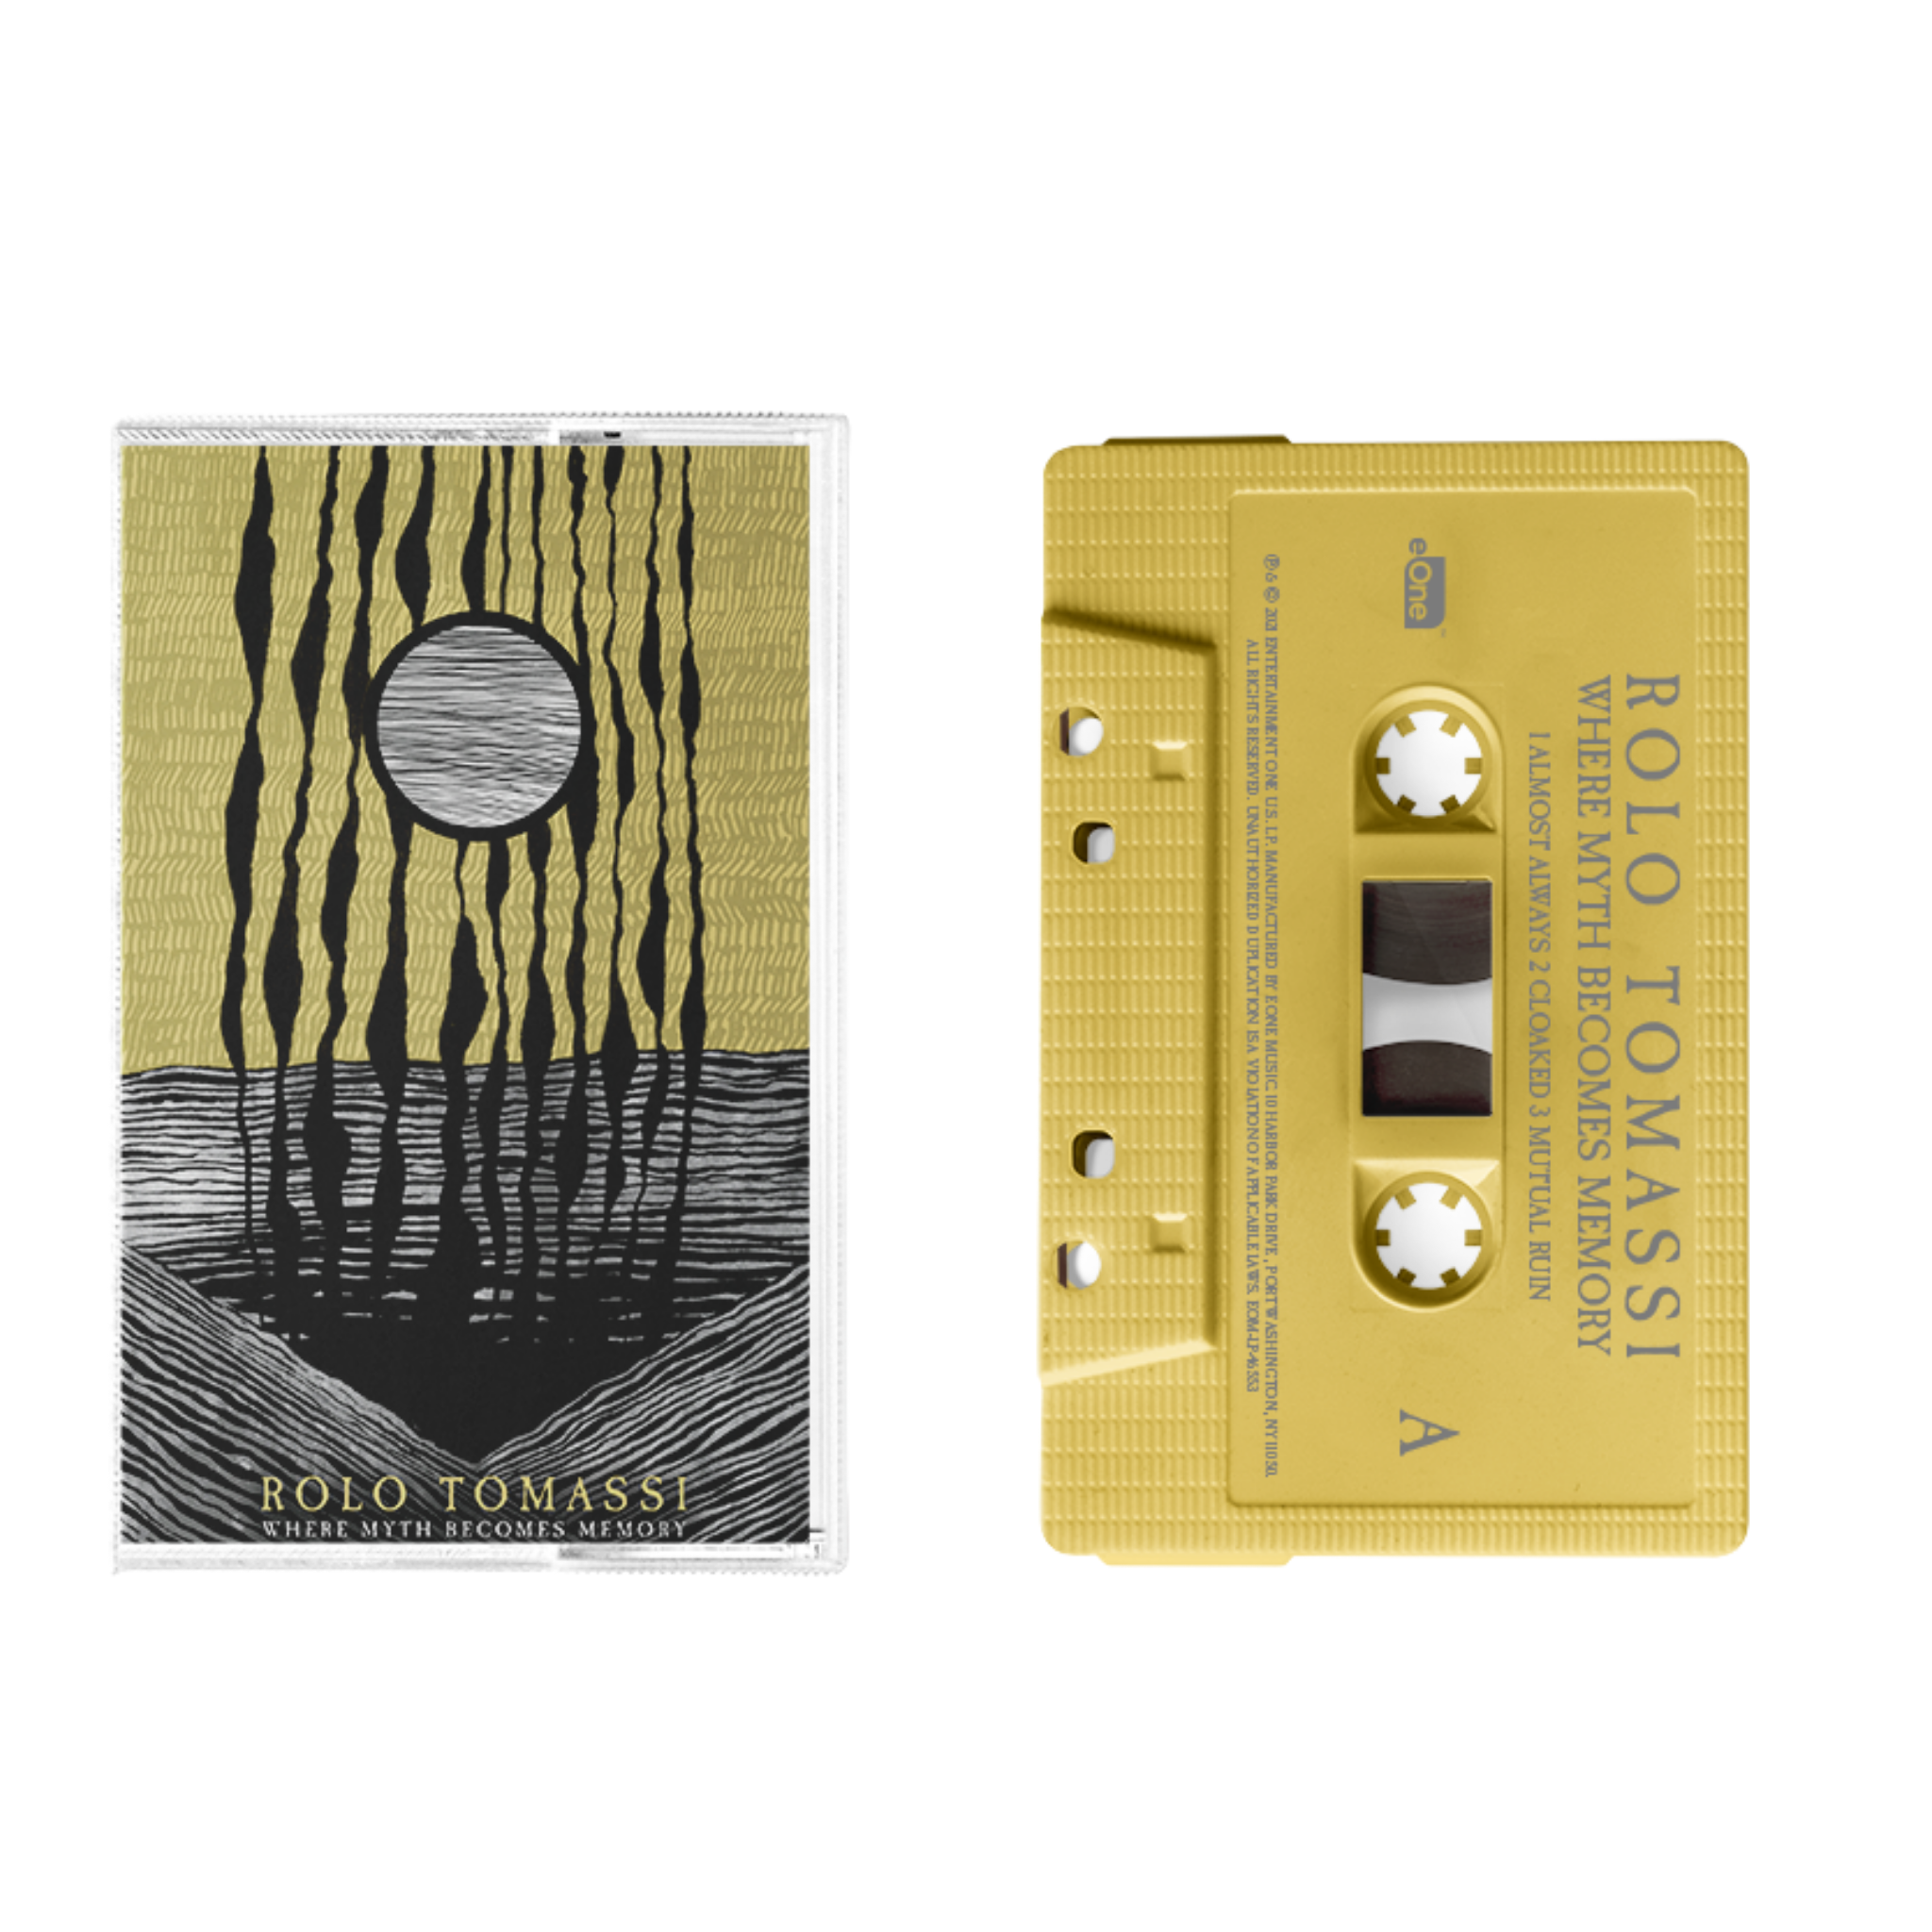 Rolo Tomassi - Where Myth Becomes Memory - Cassette